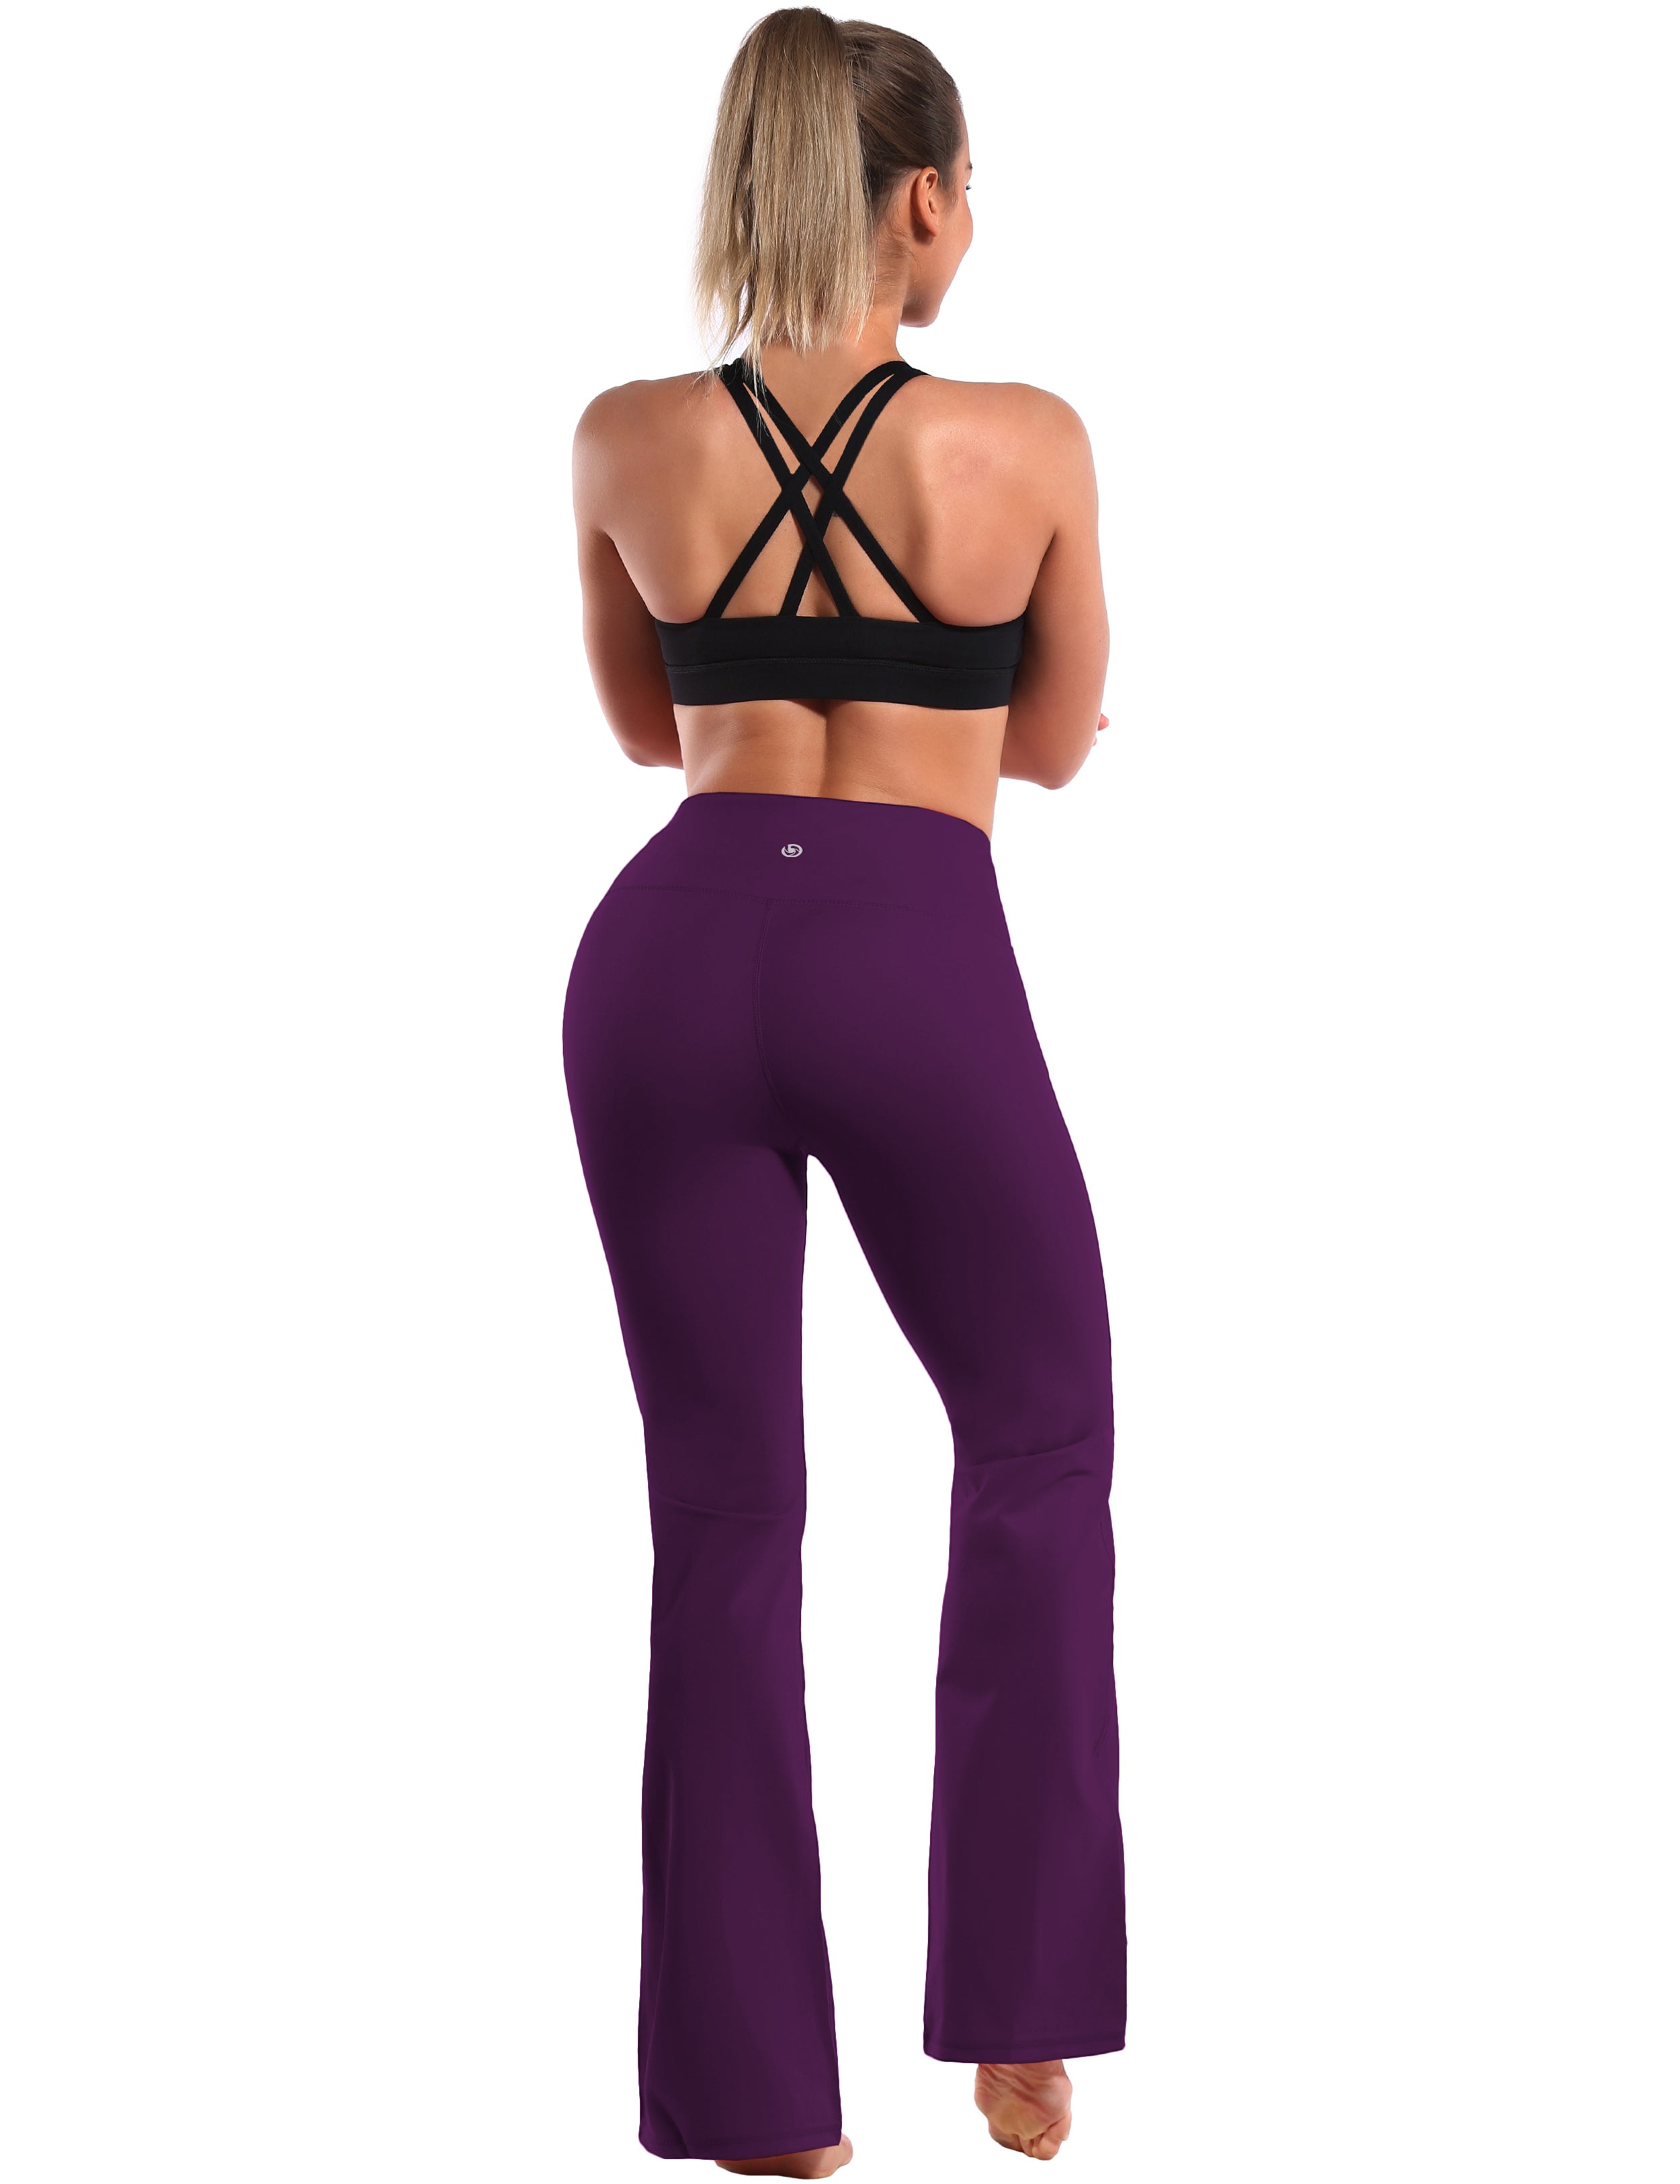 High Waist Bootcut Leggings Plum 75%Nylon/25%Spandex Fabric doesn't attract lint easily 4-way stretch No see-through Moisture-wicking Tummy control Inner pocket Five lengths